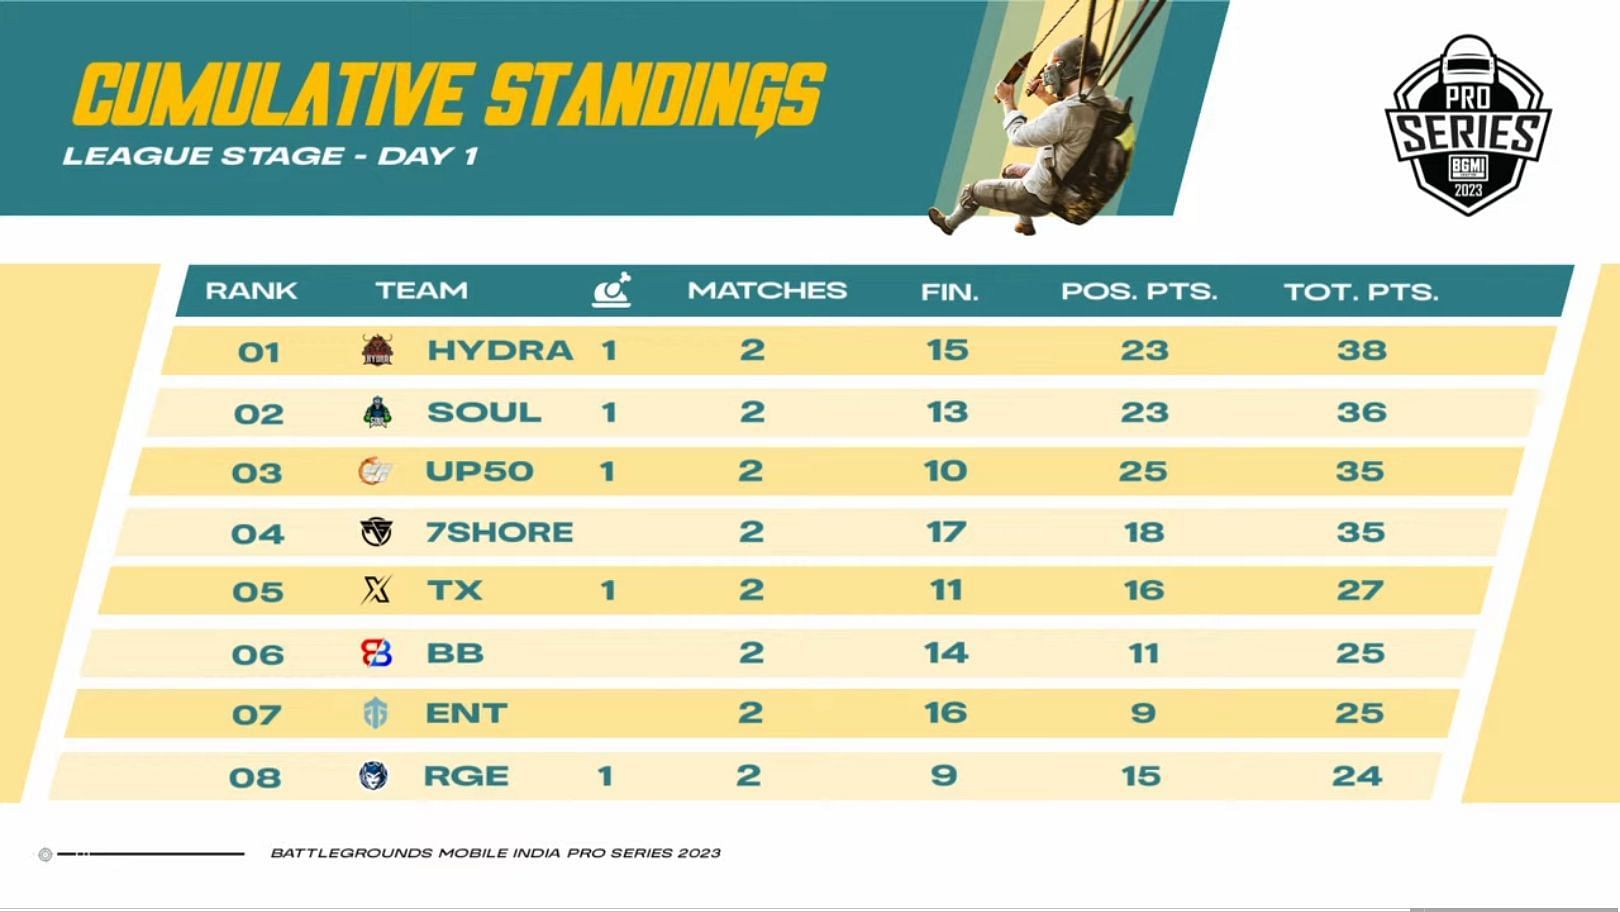 Hydra Officials gained first rank after two matches (Image via BGMI)